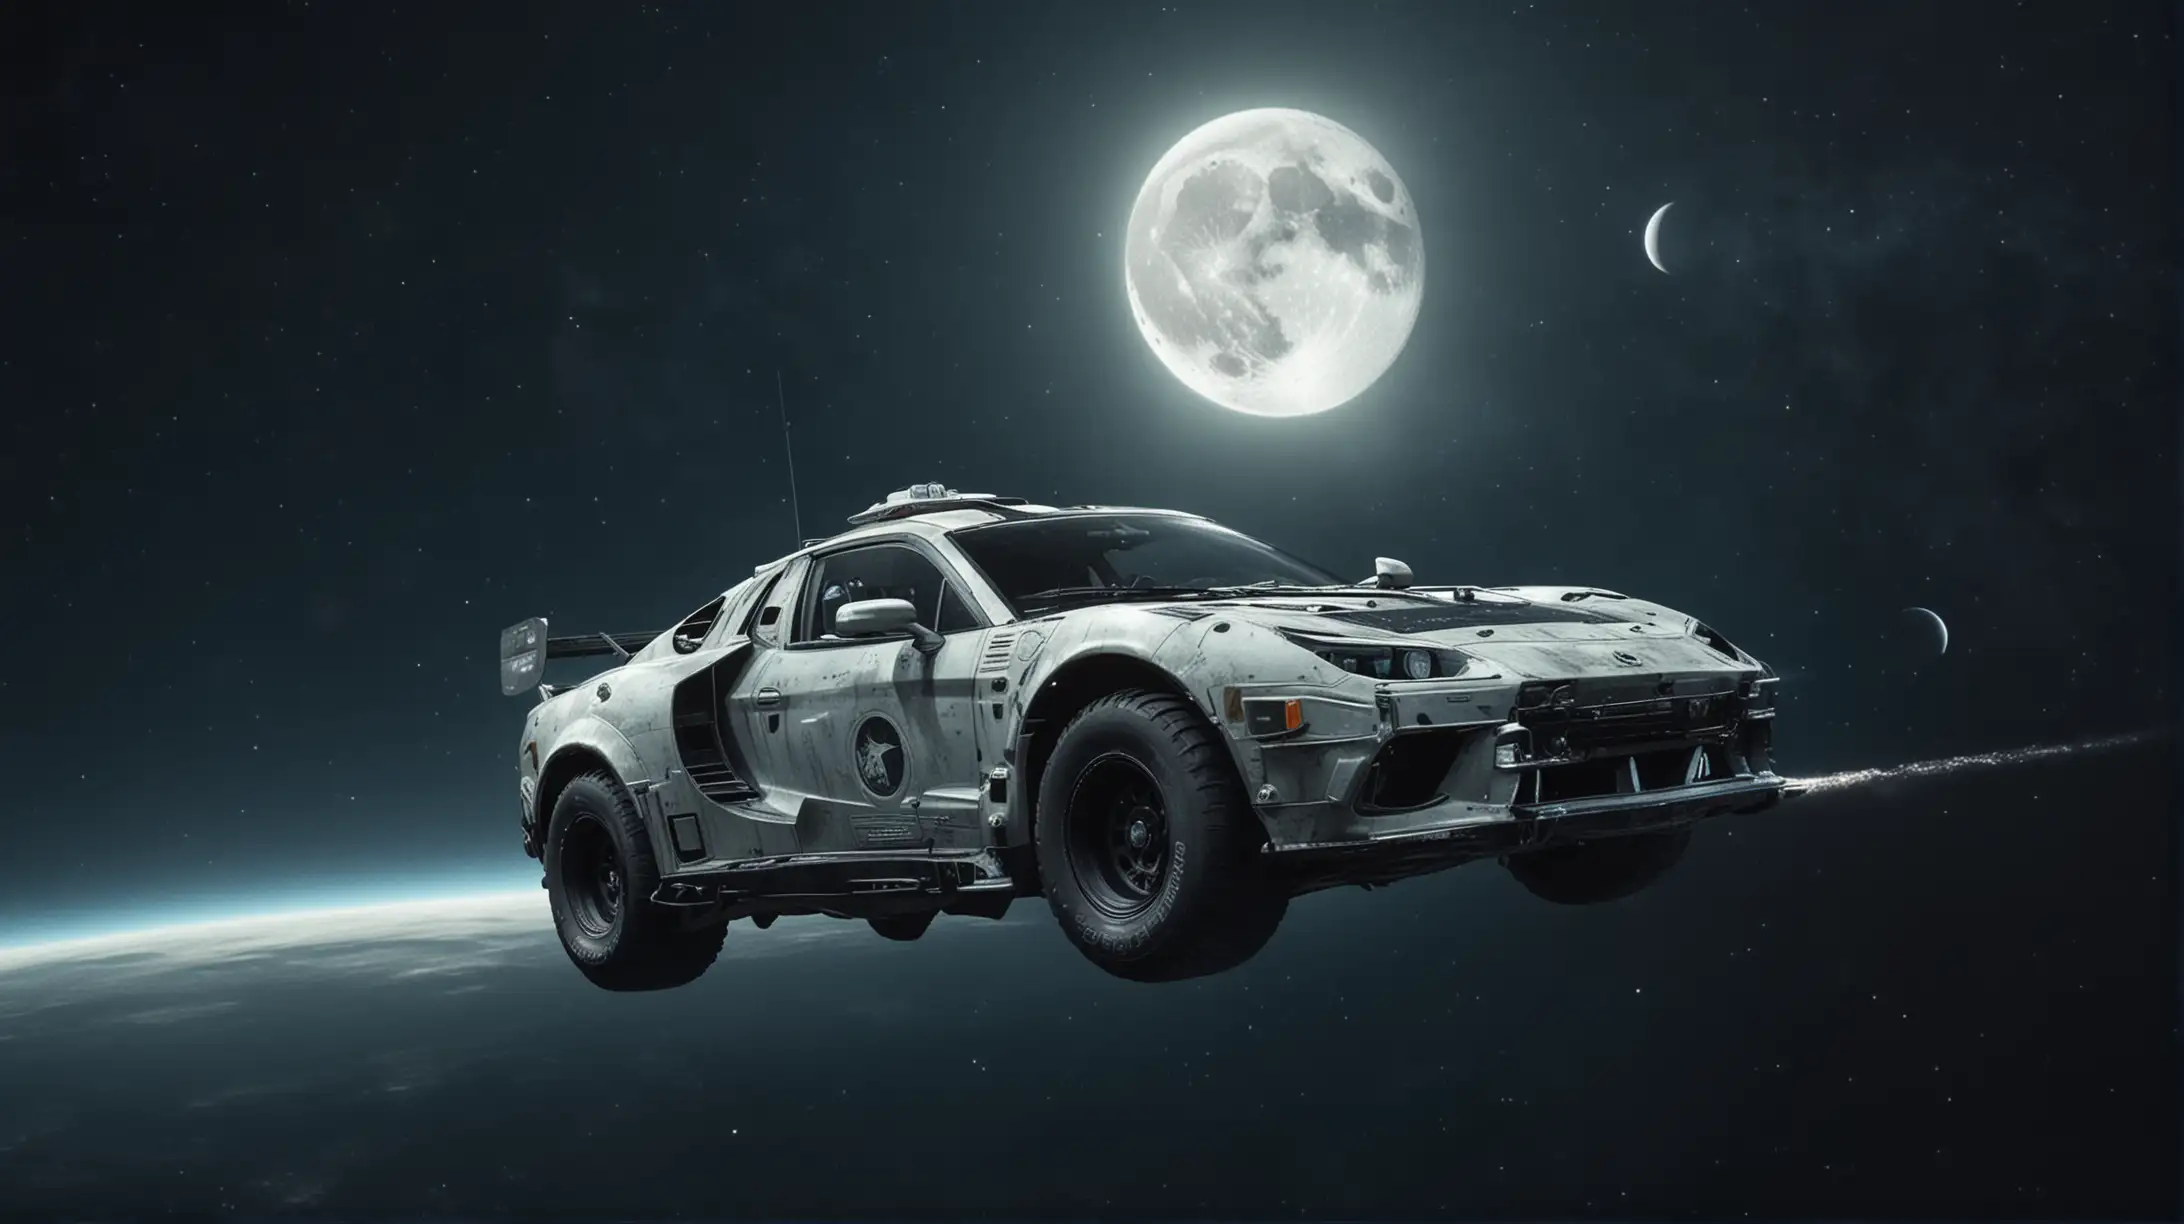 Stellar Drive Moonlit Space Journey with a Futuristic Vehicle